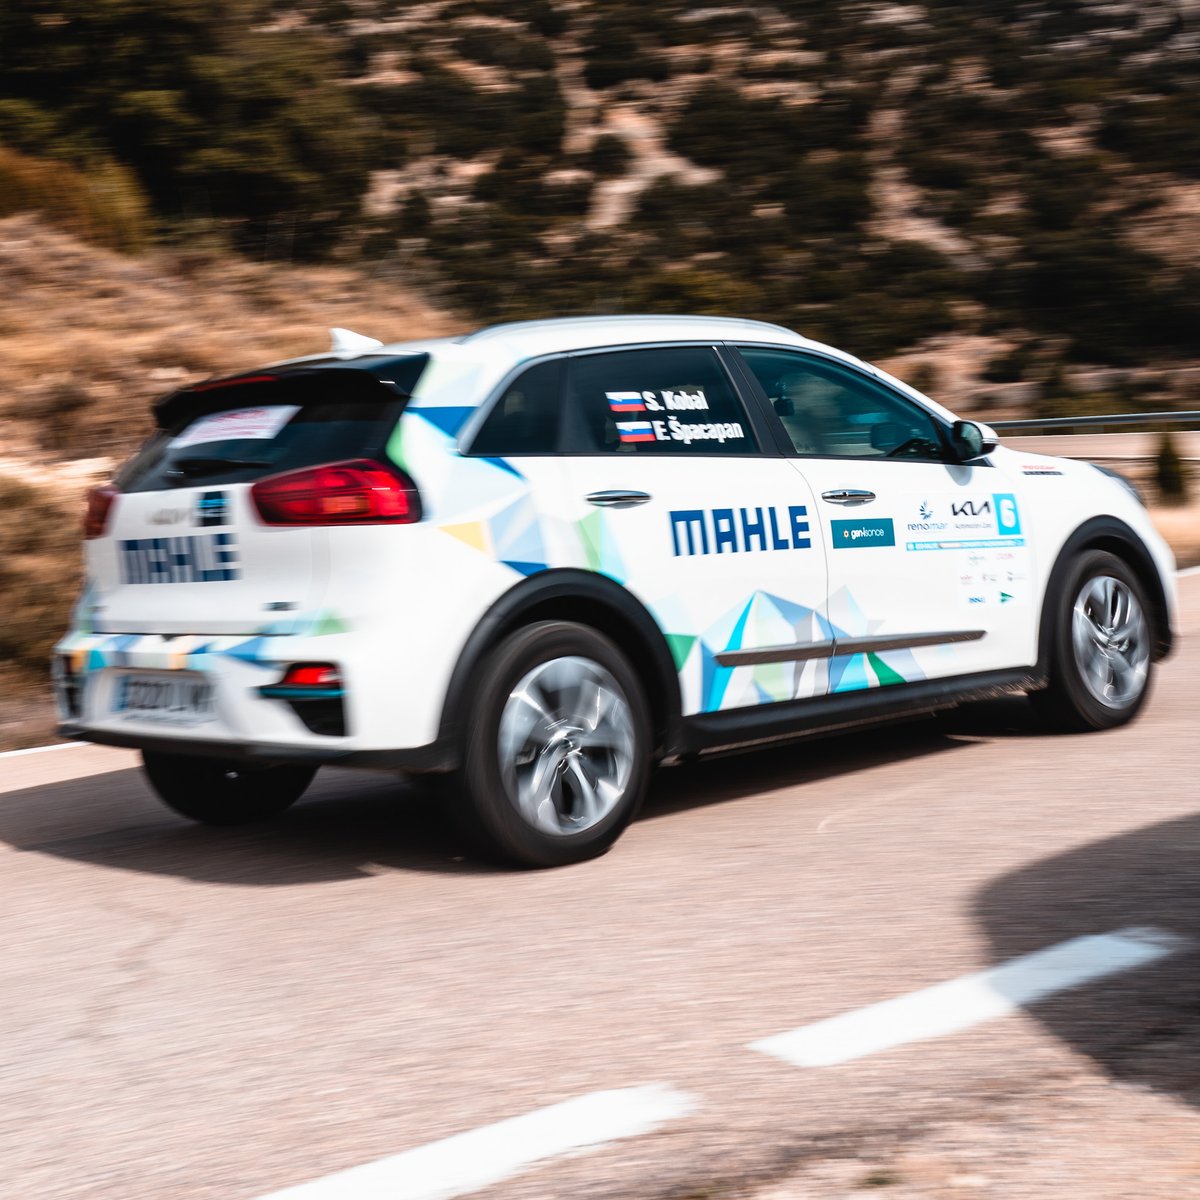 Charged and ready! After a spectacular #podiumfinish last year, our #Slovenian #MAHLE #emobility coworkers Franko Špacapan & Sebastjan Kobal are back for the prestigious @fia E-Rallye Monte Carlo—promoting MAHLE and our #commitment to emobility in this @ACM_Media event.